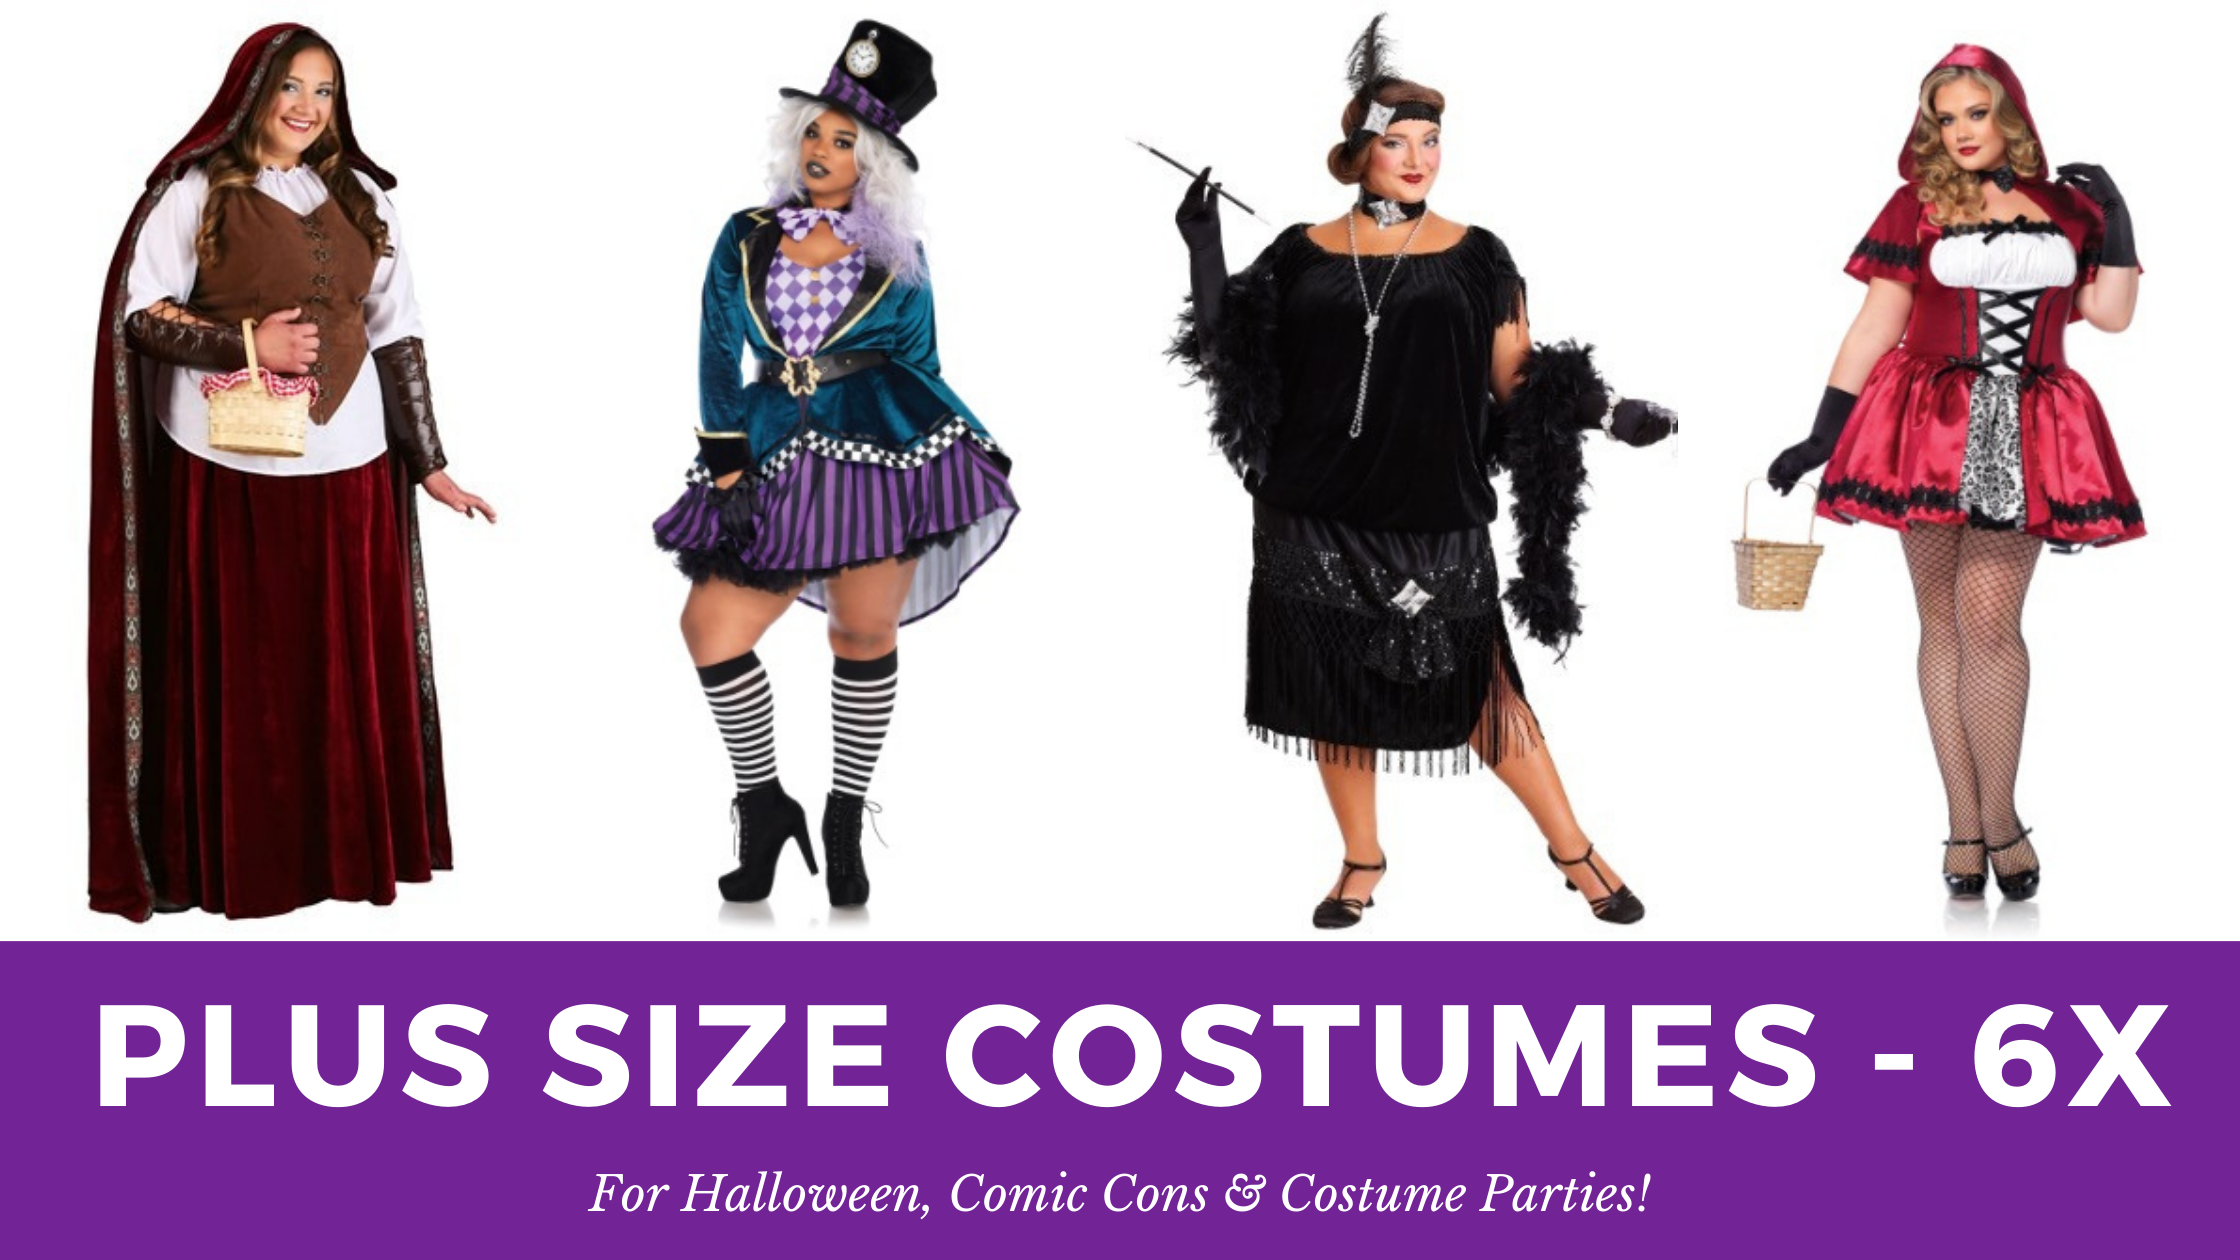 Where to Buy Plus Size Halloween Costumes in a 6X - The Huntswoman